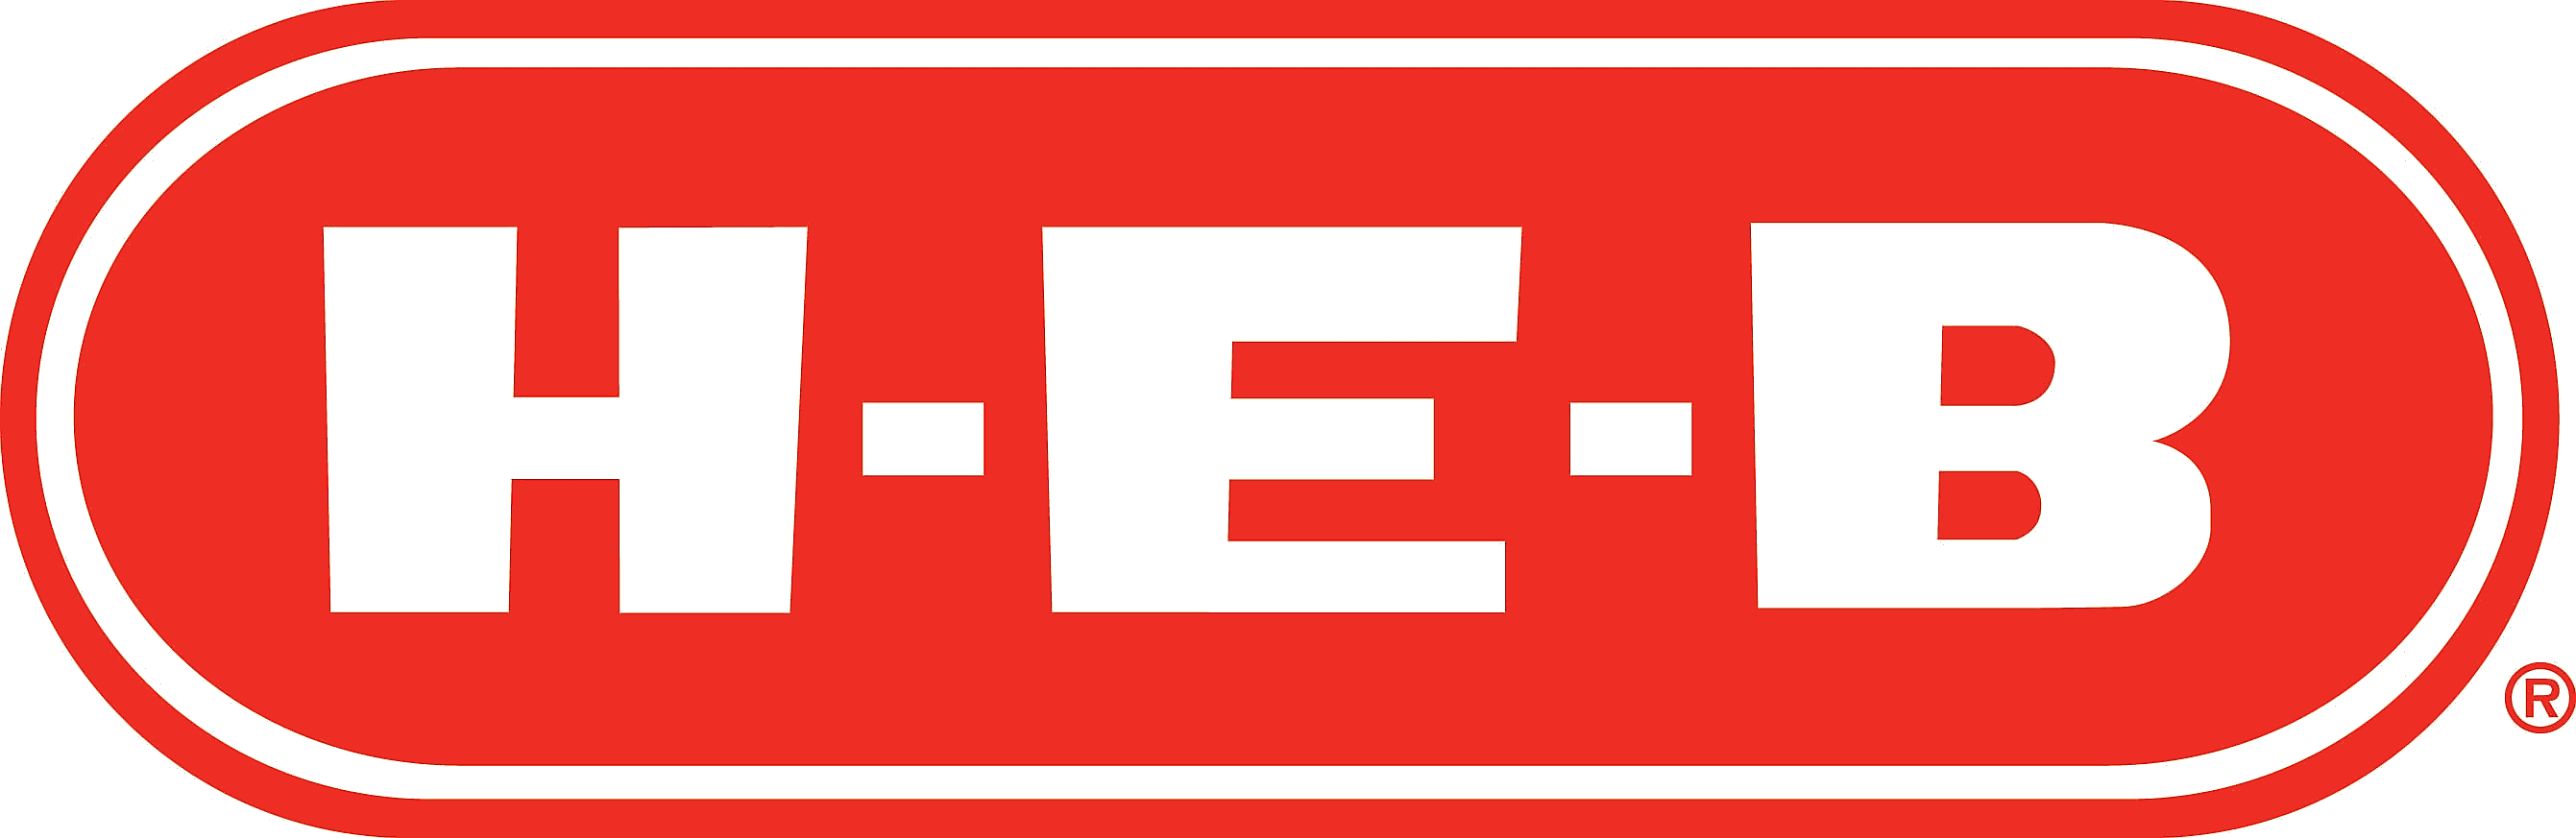 File:Logo of the HEB Grocery Company, LP.png - Wikimedia Commons